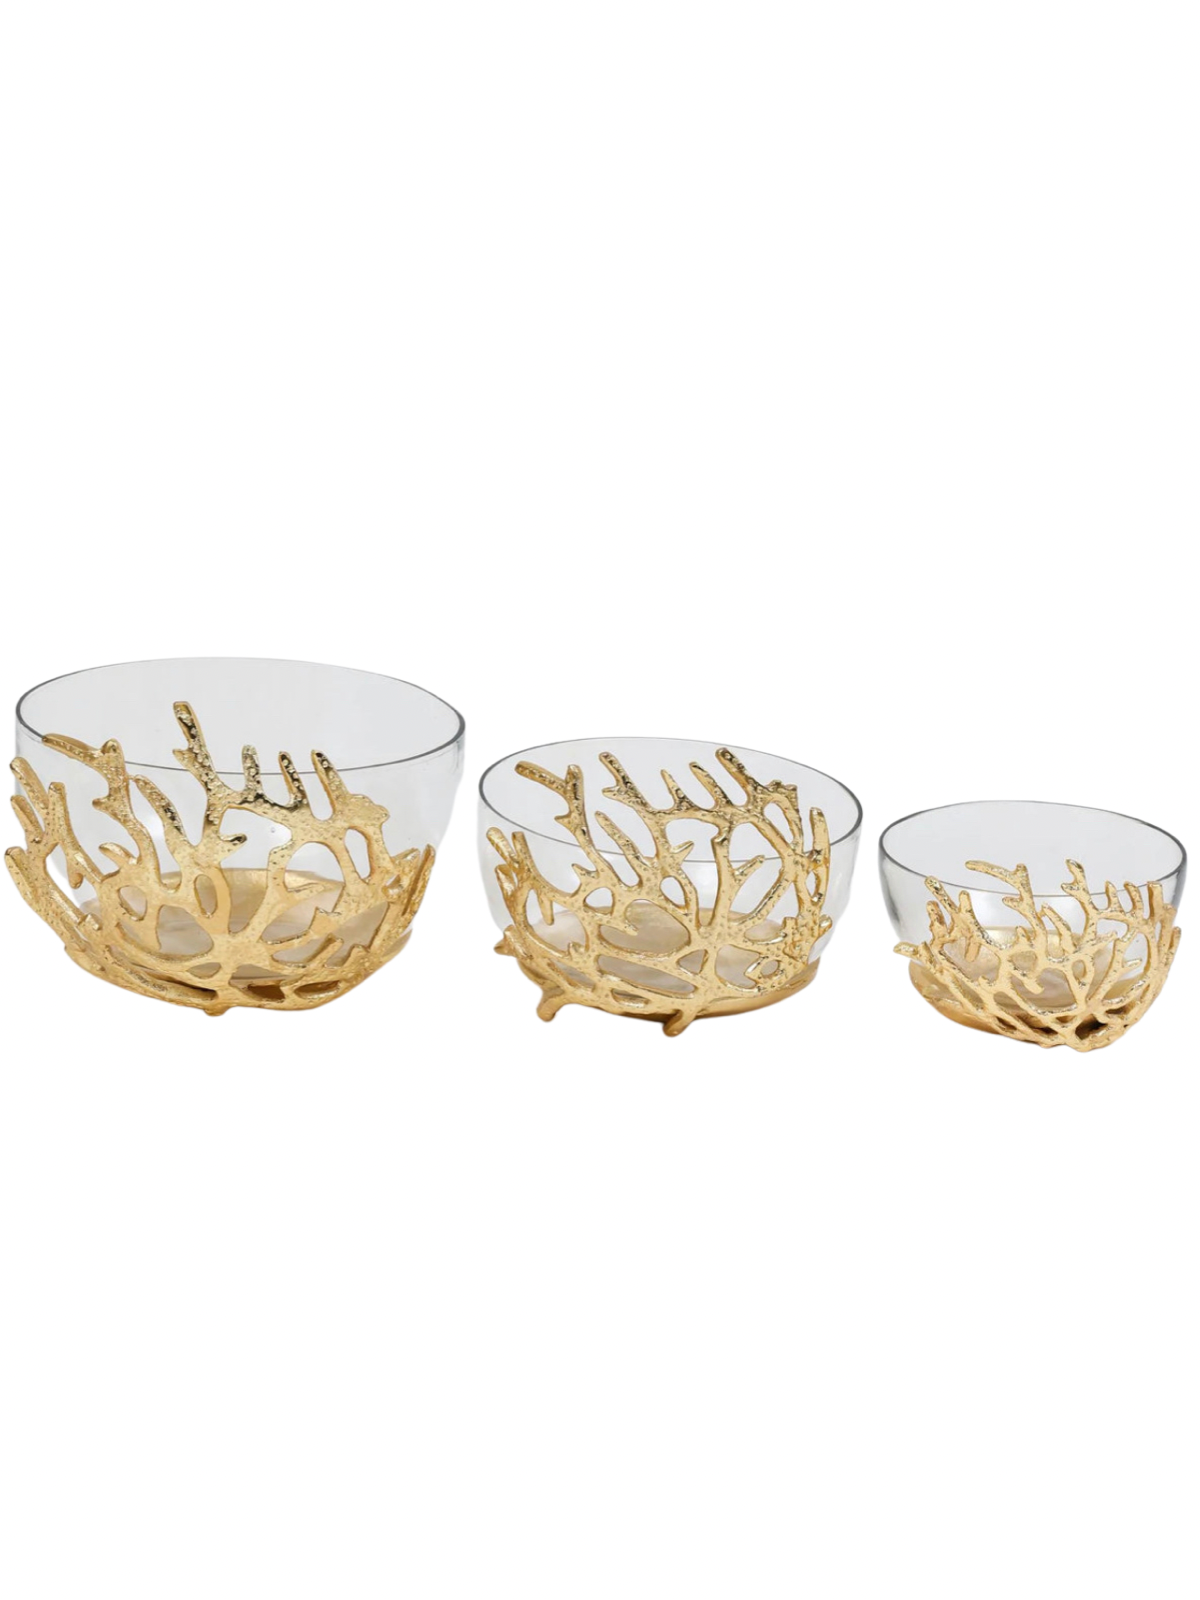 Glass Bowl with Gold Branch Design are stunning pieces that come in 3 sizes. 